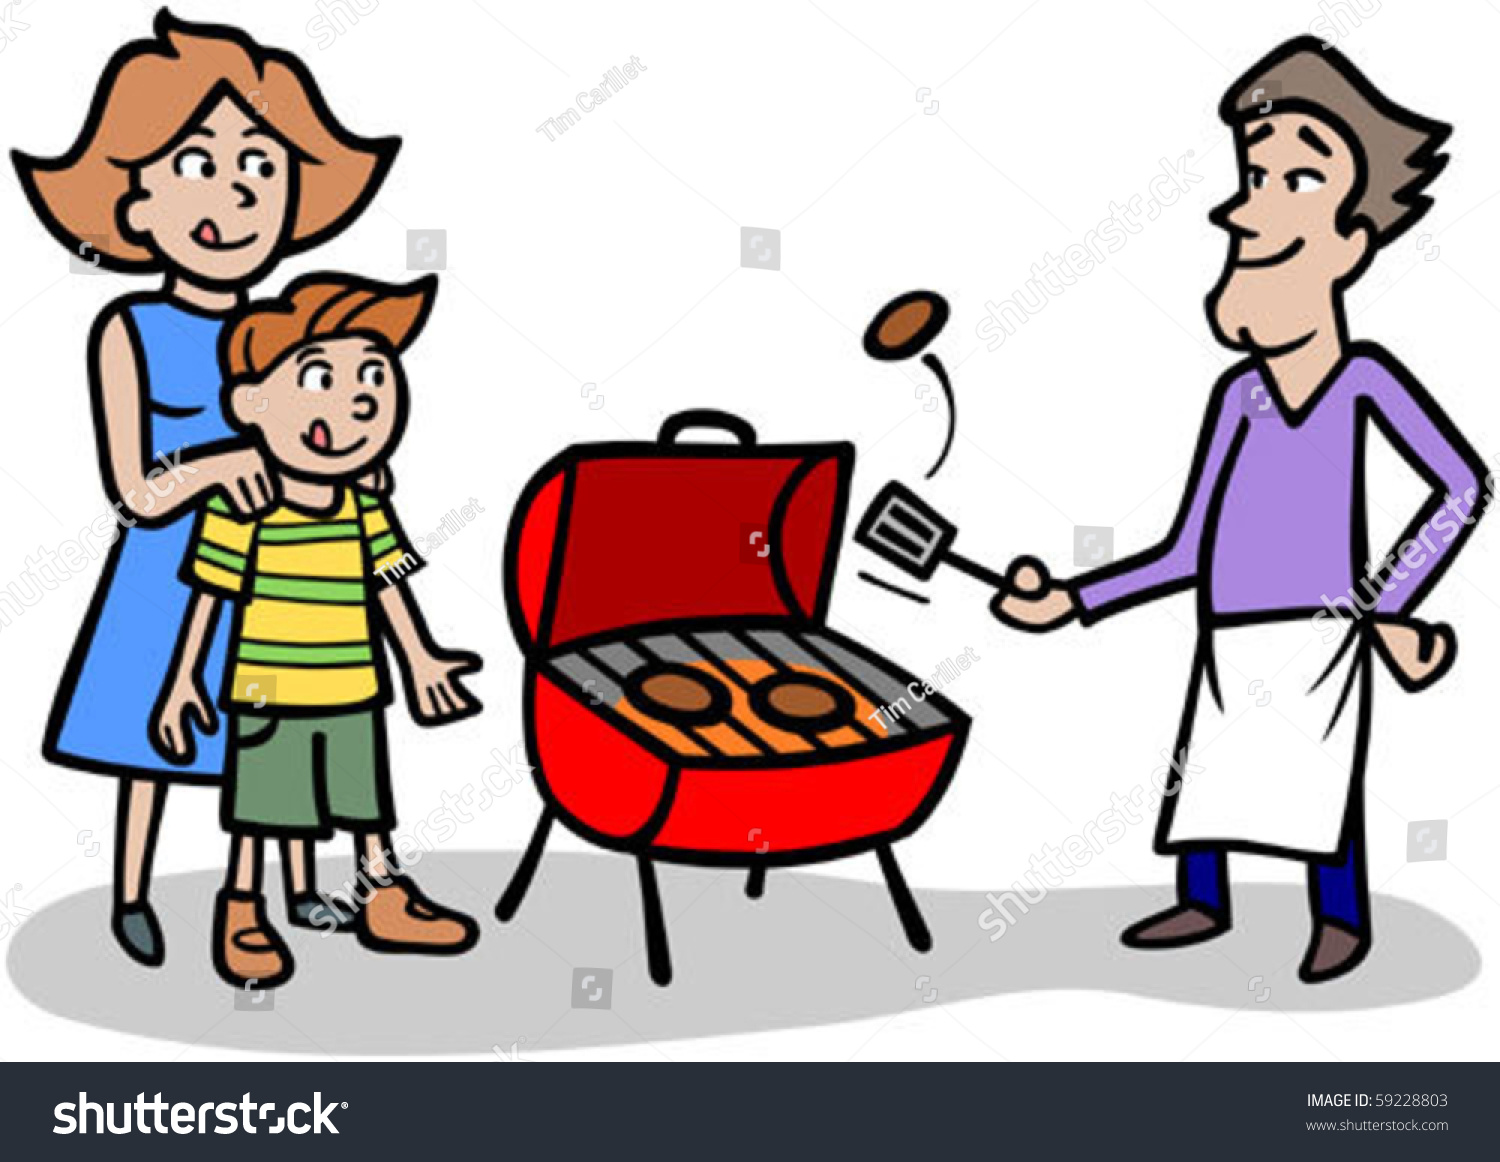 free clipart man grilling - photo #50